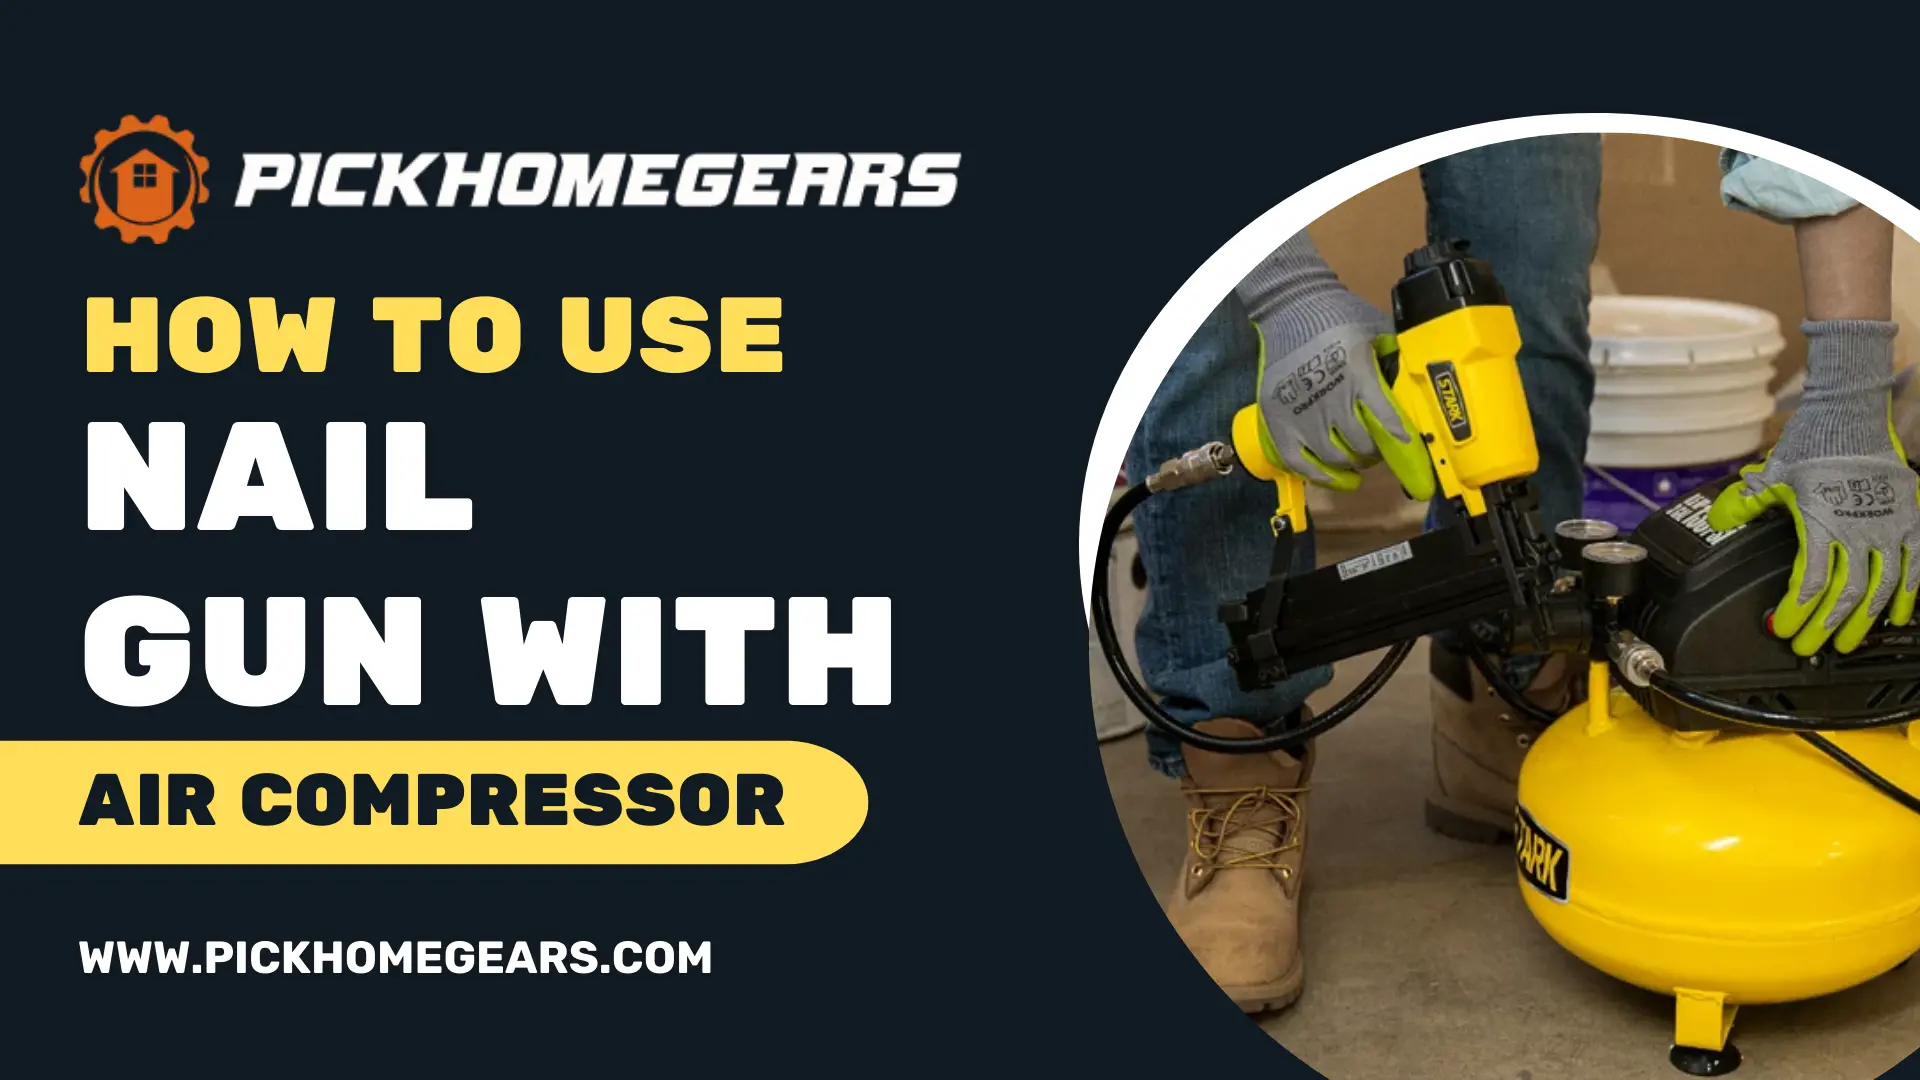 How To Use Nail Gun With Air Compressor